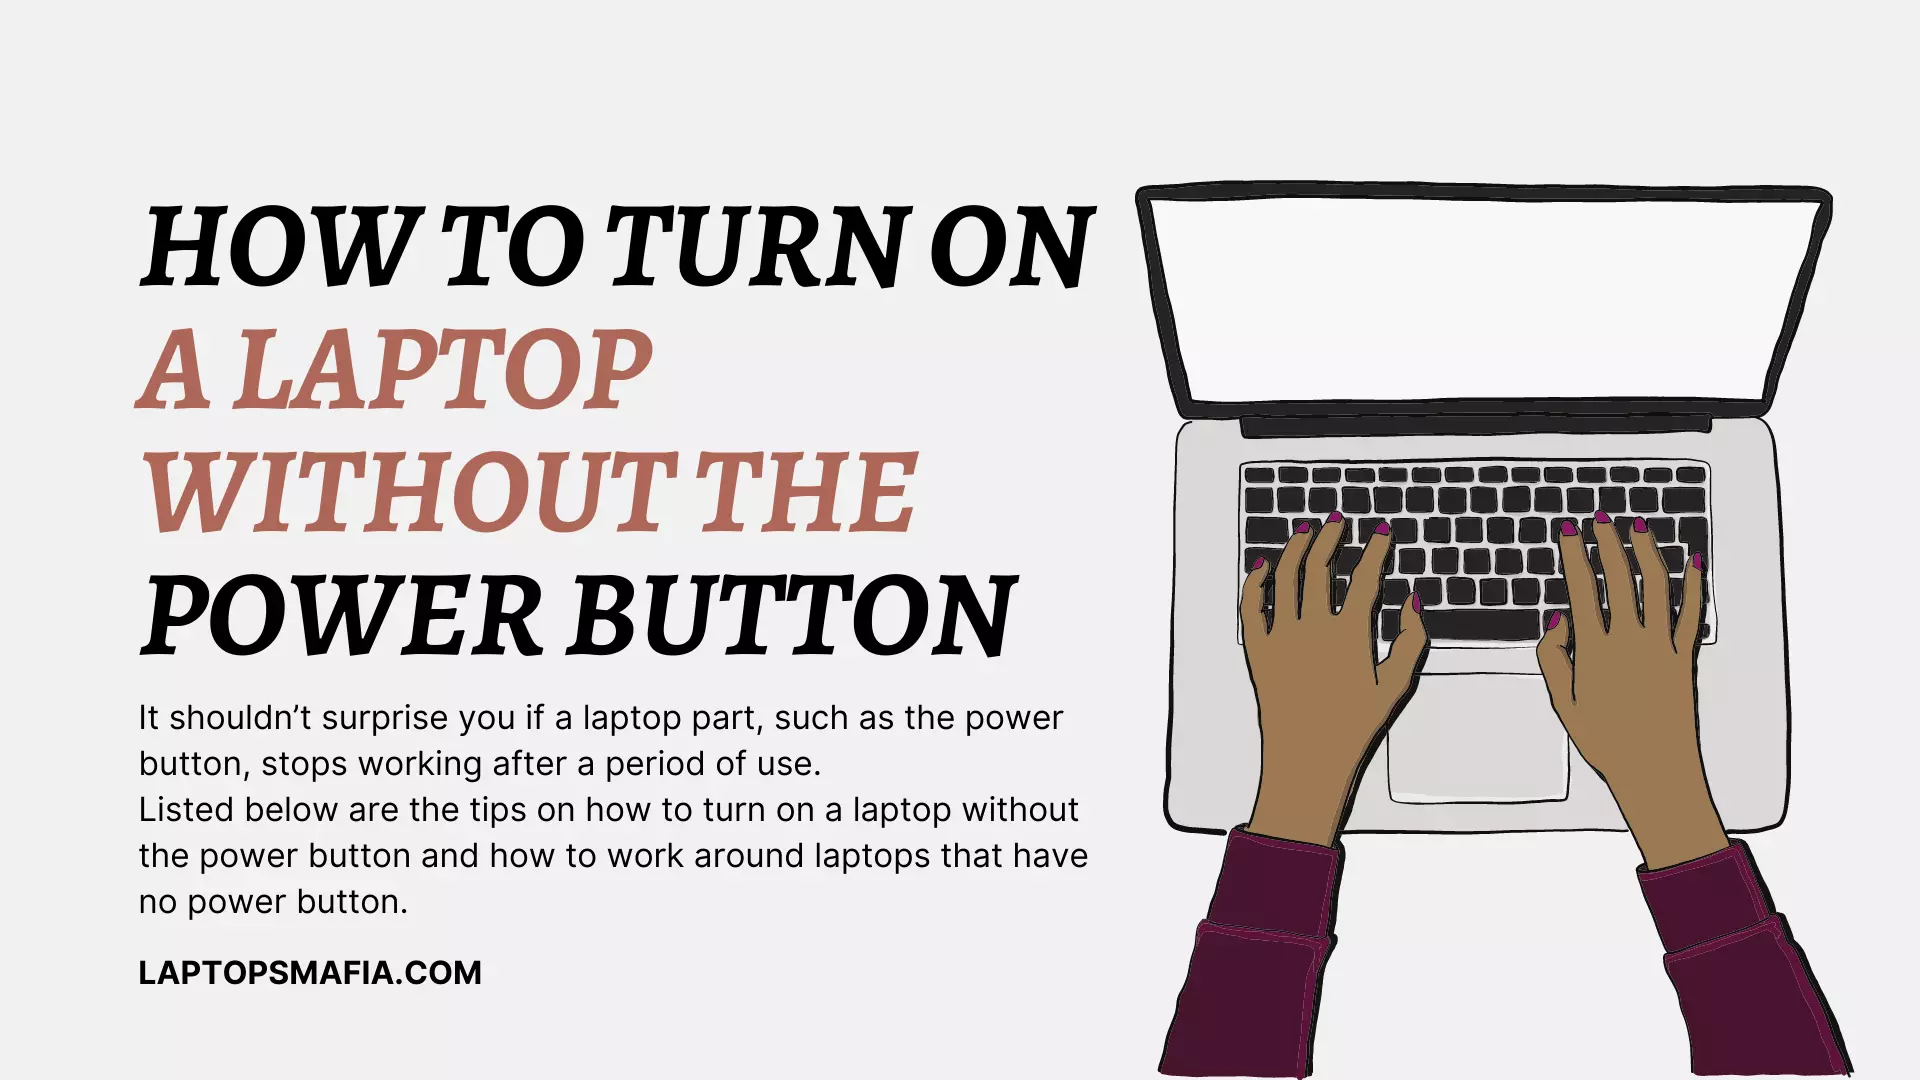 How To Turn On A Laptop Without The Power Button